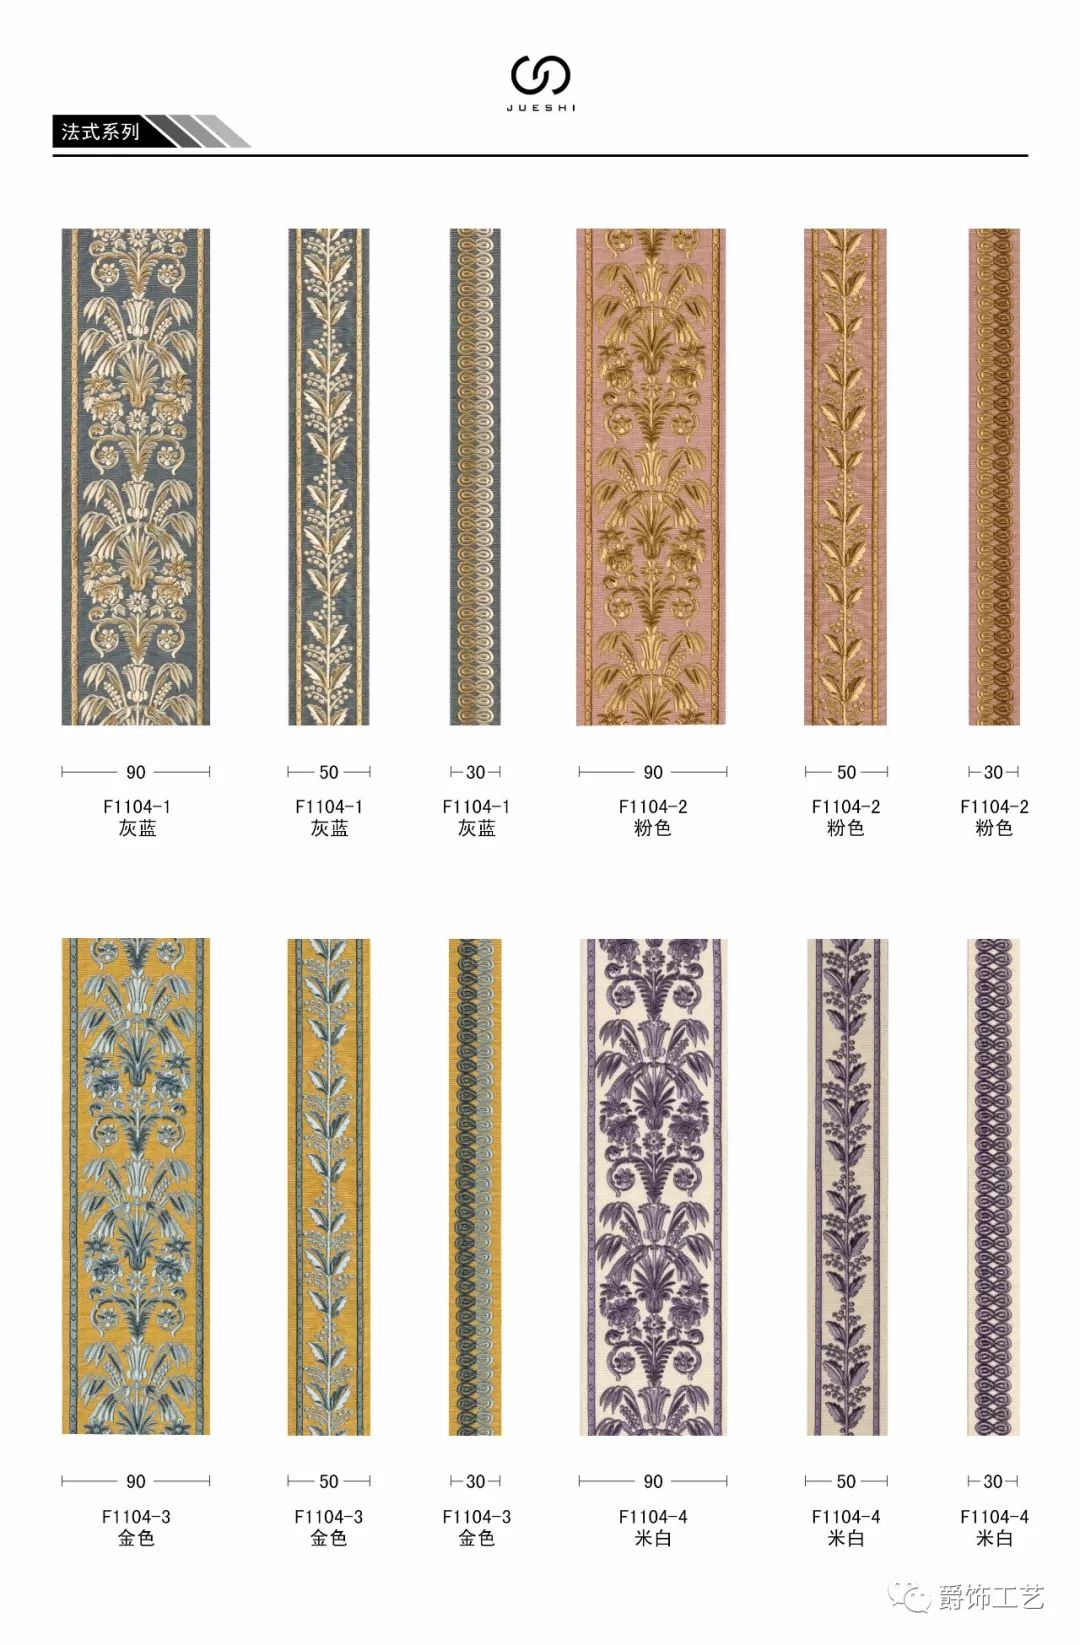 3cm  5cm  9cm Curtain Fabric Curtain Border Lace Embroidery Tape Featured Image